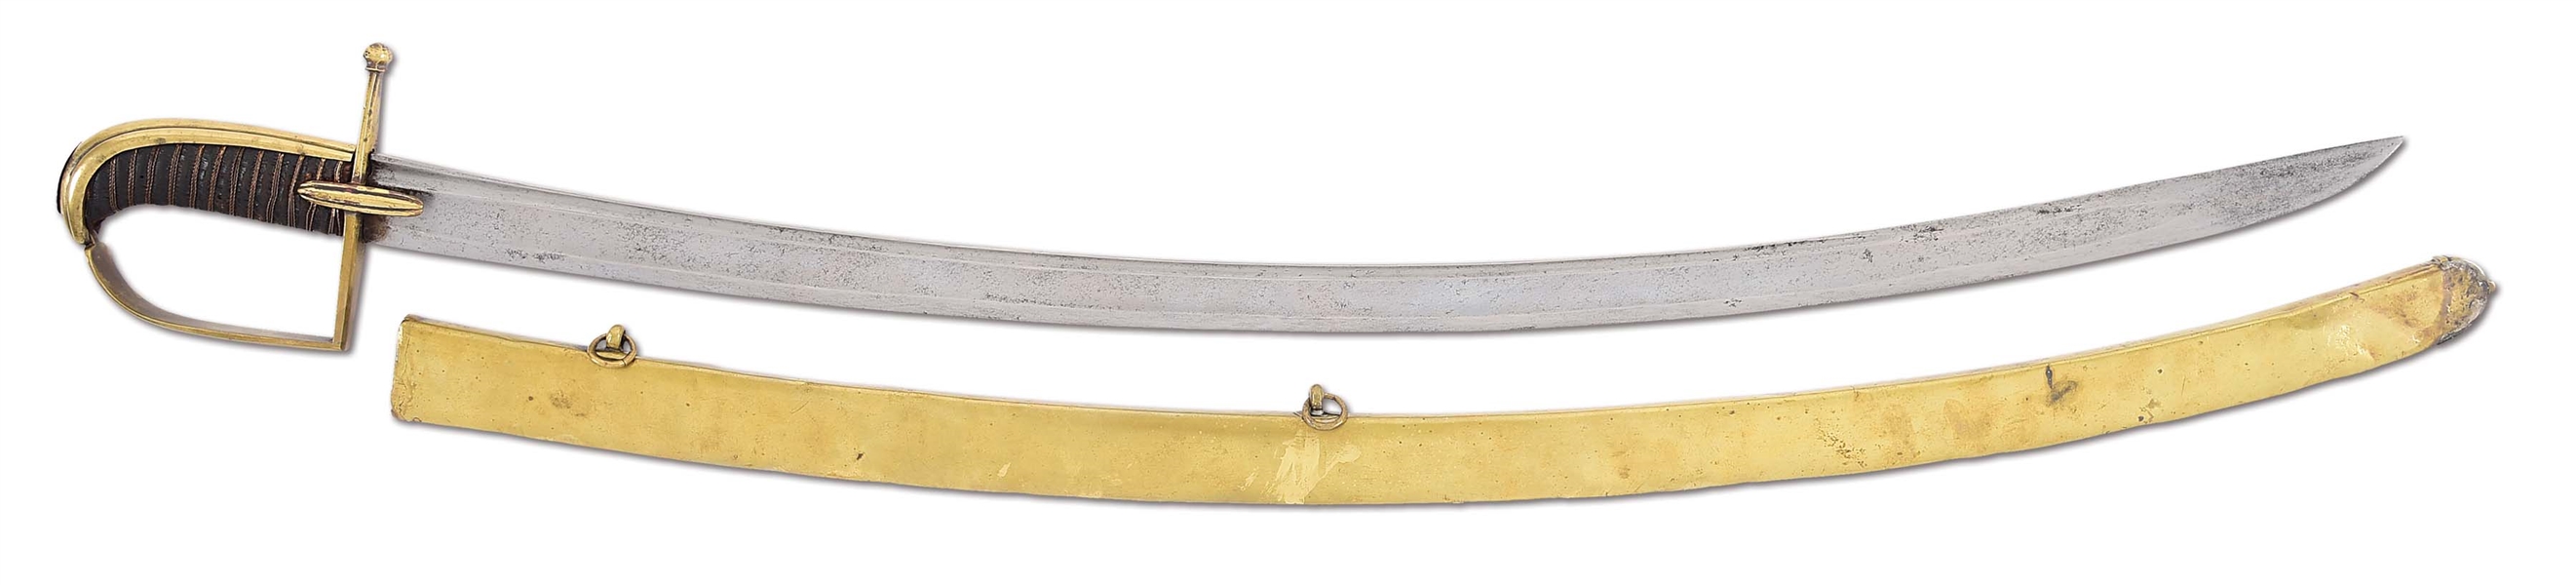 PRUSSIAN 18TH CENTURY HUSSAR CAVALRY SABER 